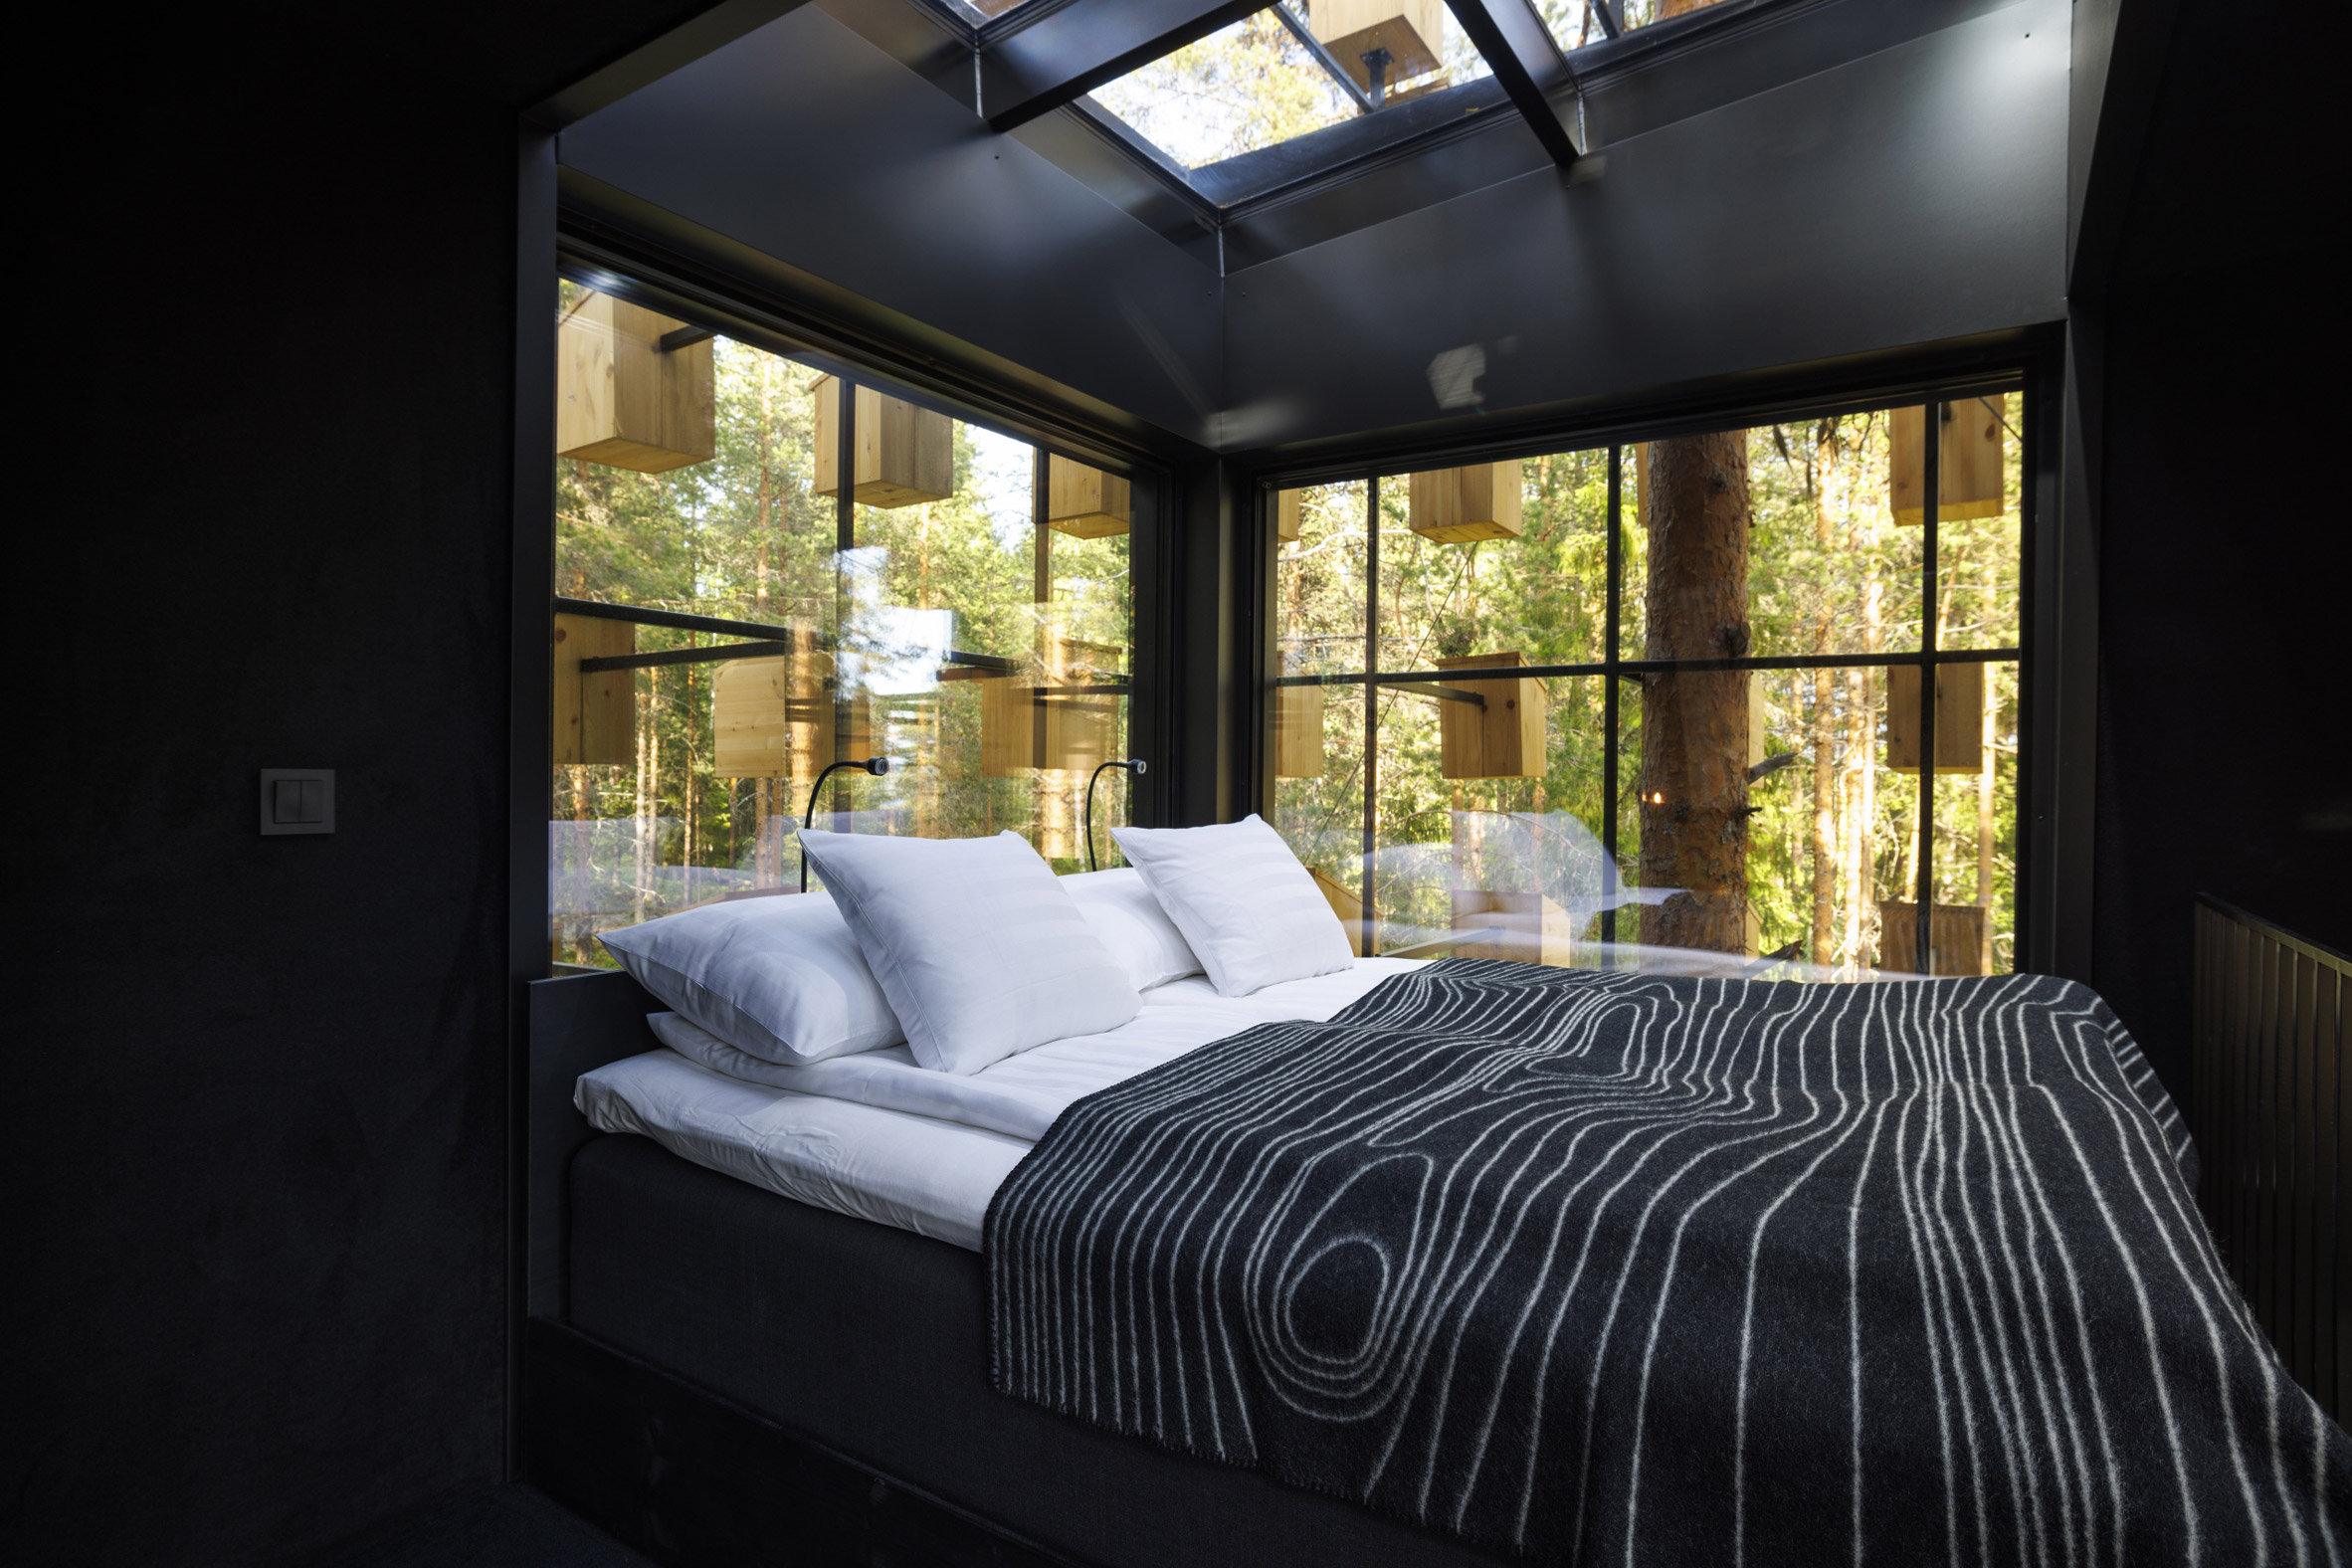 Bedroom with views of birdhouses